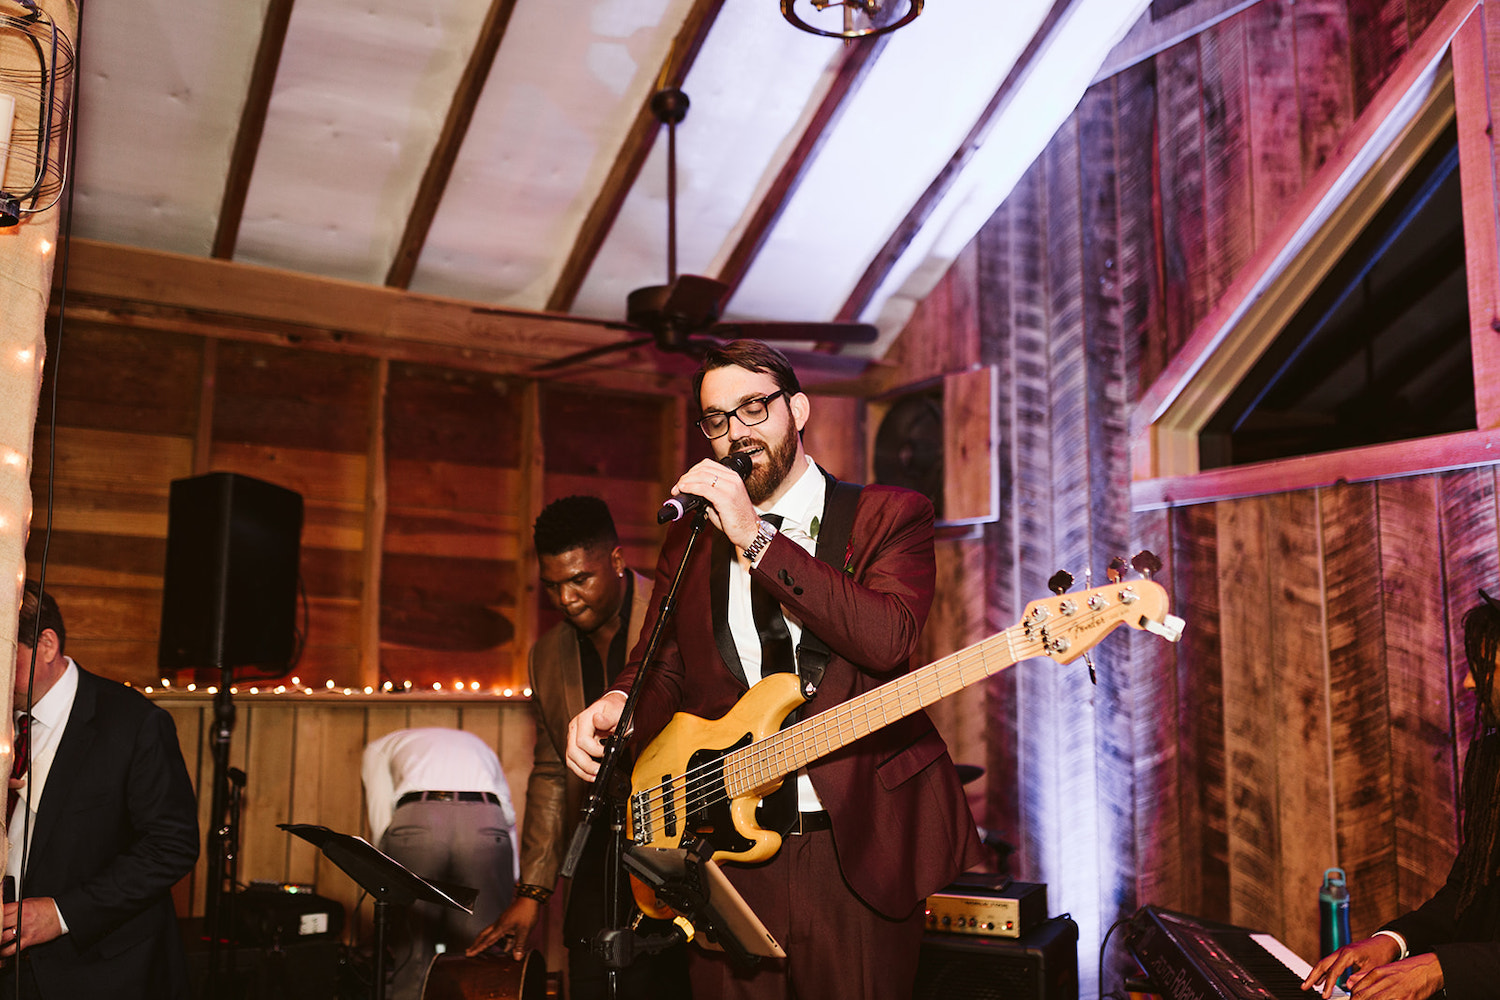 groom sings into microphone as his band plays